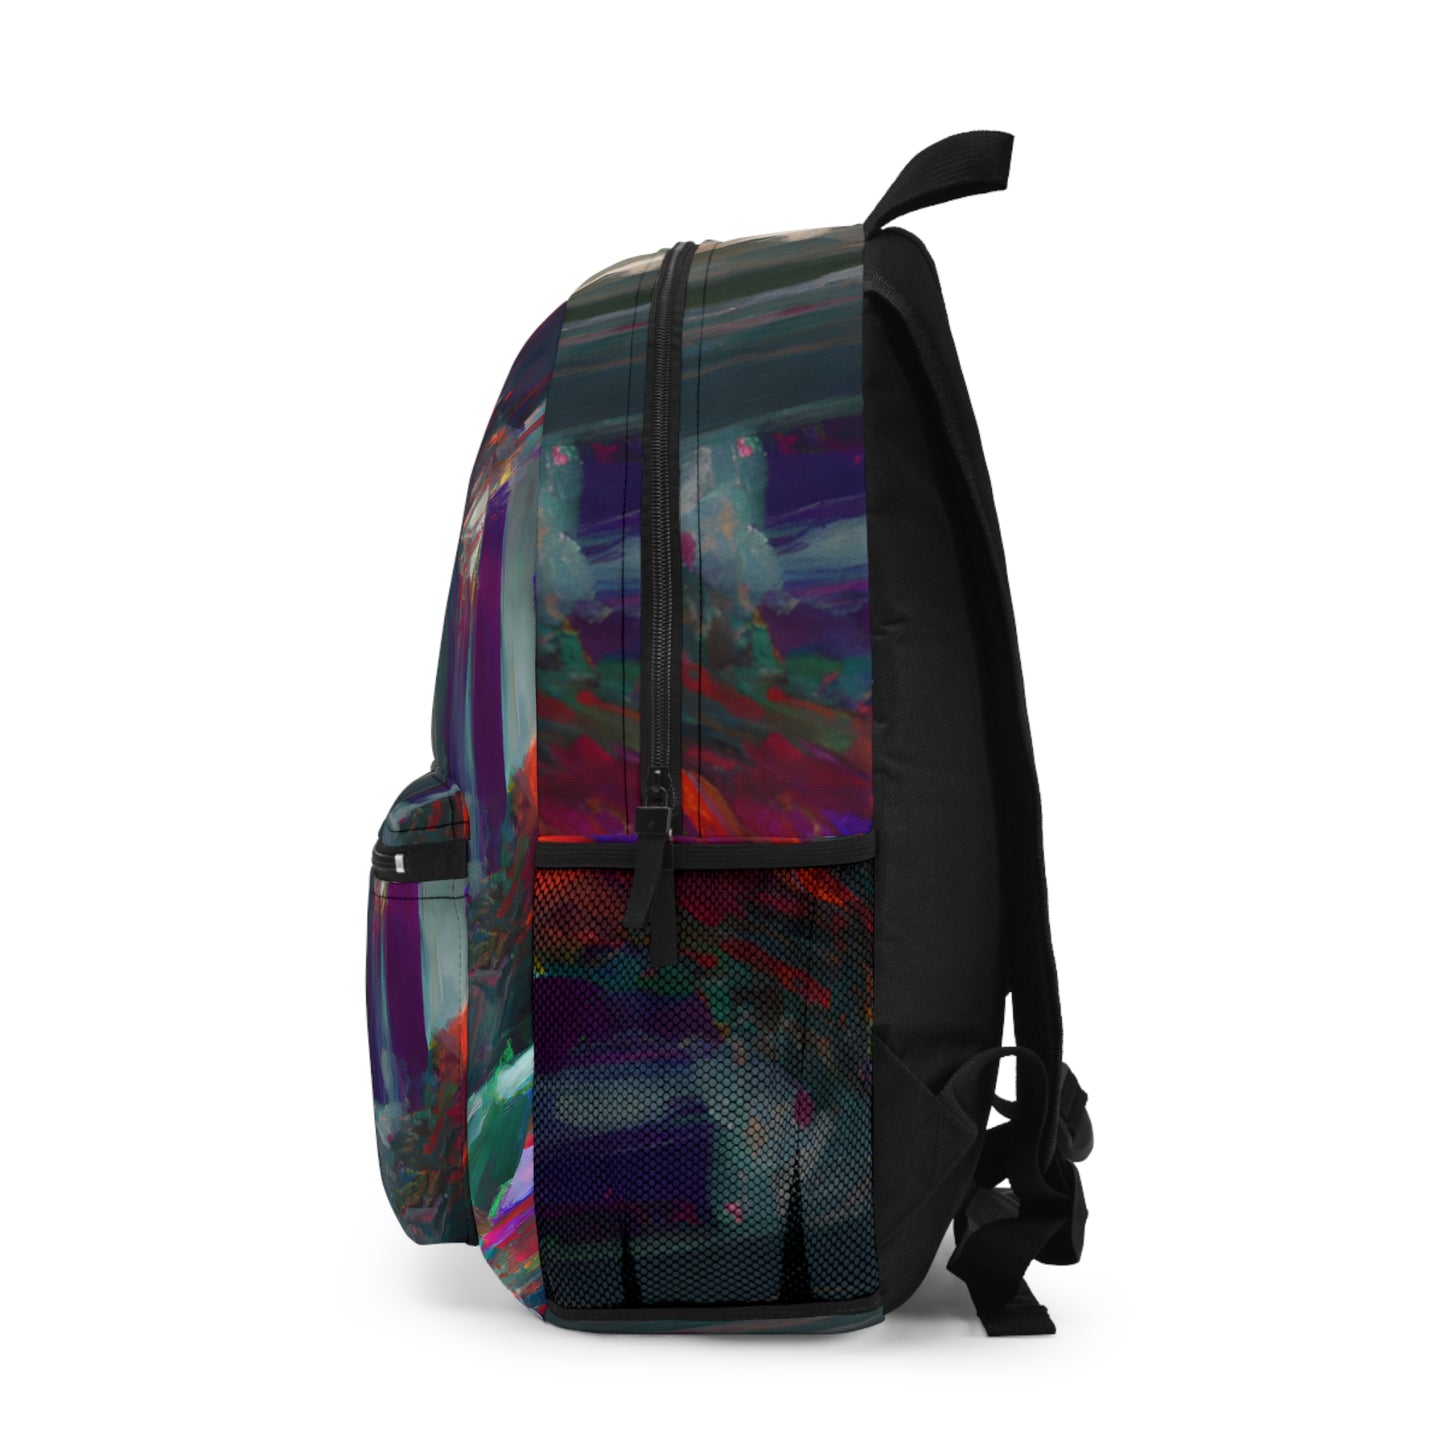 Vertex Integrity - Accrual, Abstractly - Backpack